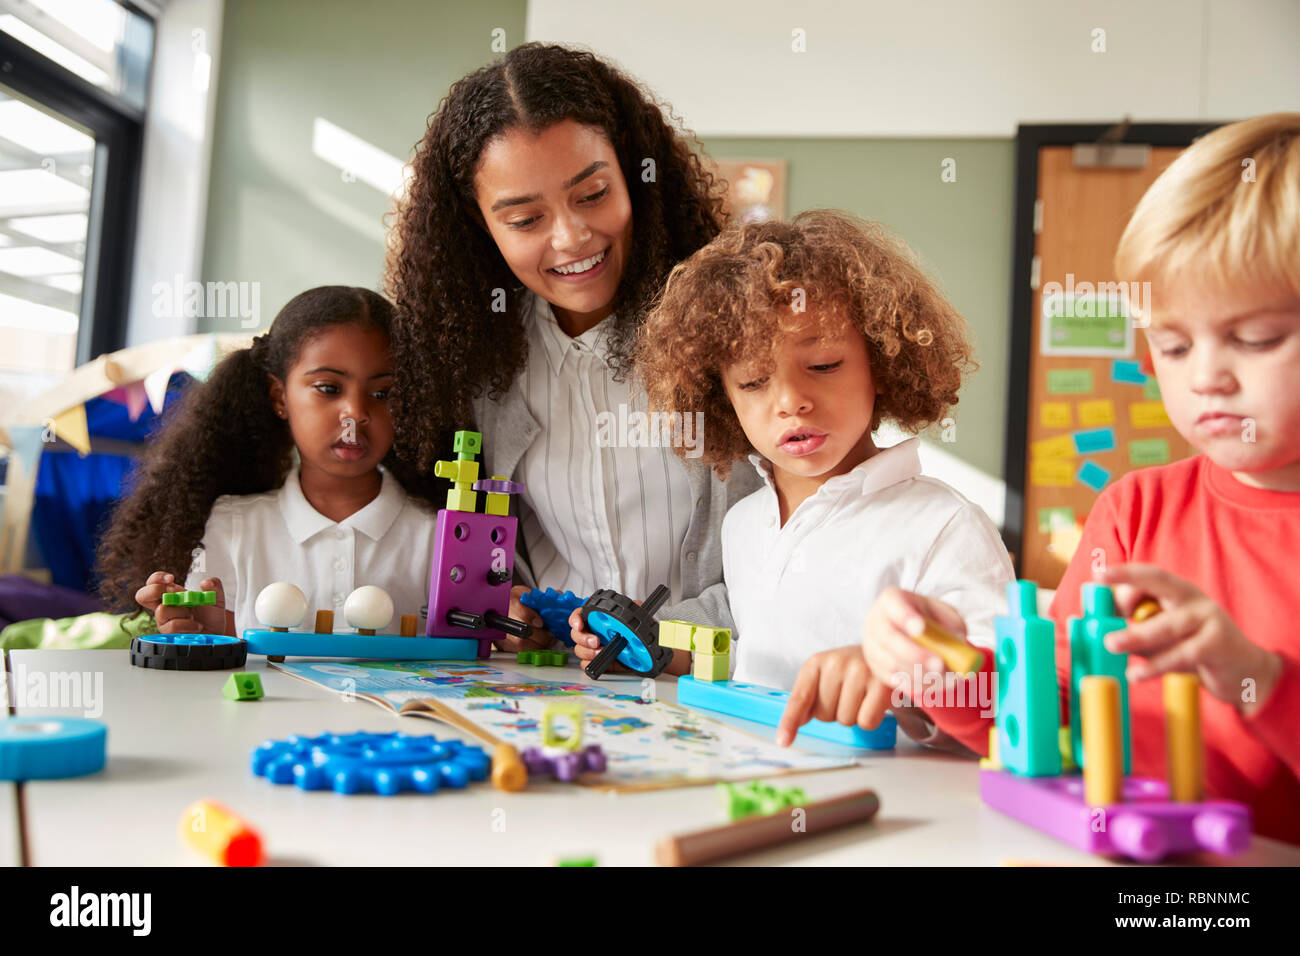 Female teacher sitting at table in play room with three kindergartne children constructing, selective focus Stock Photo